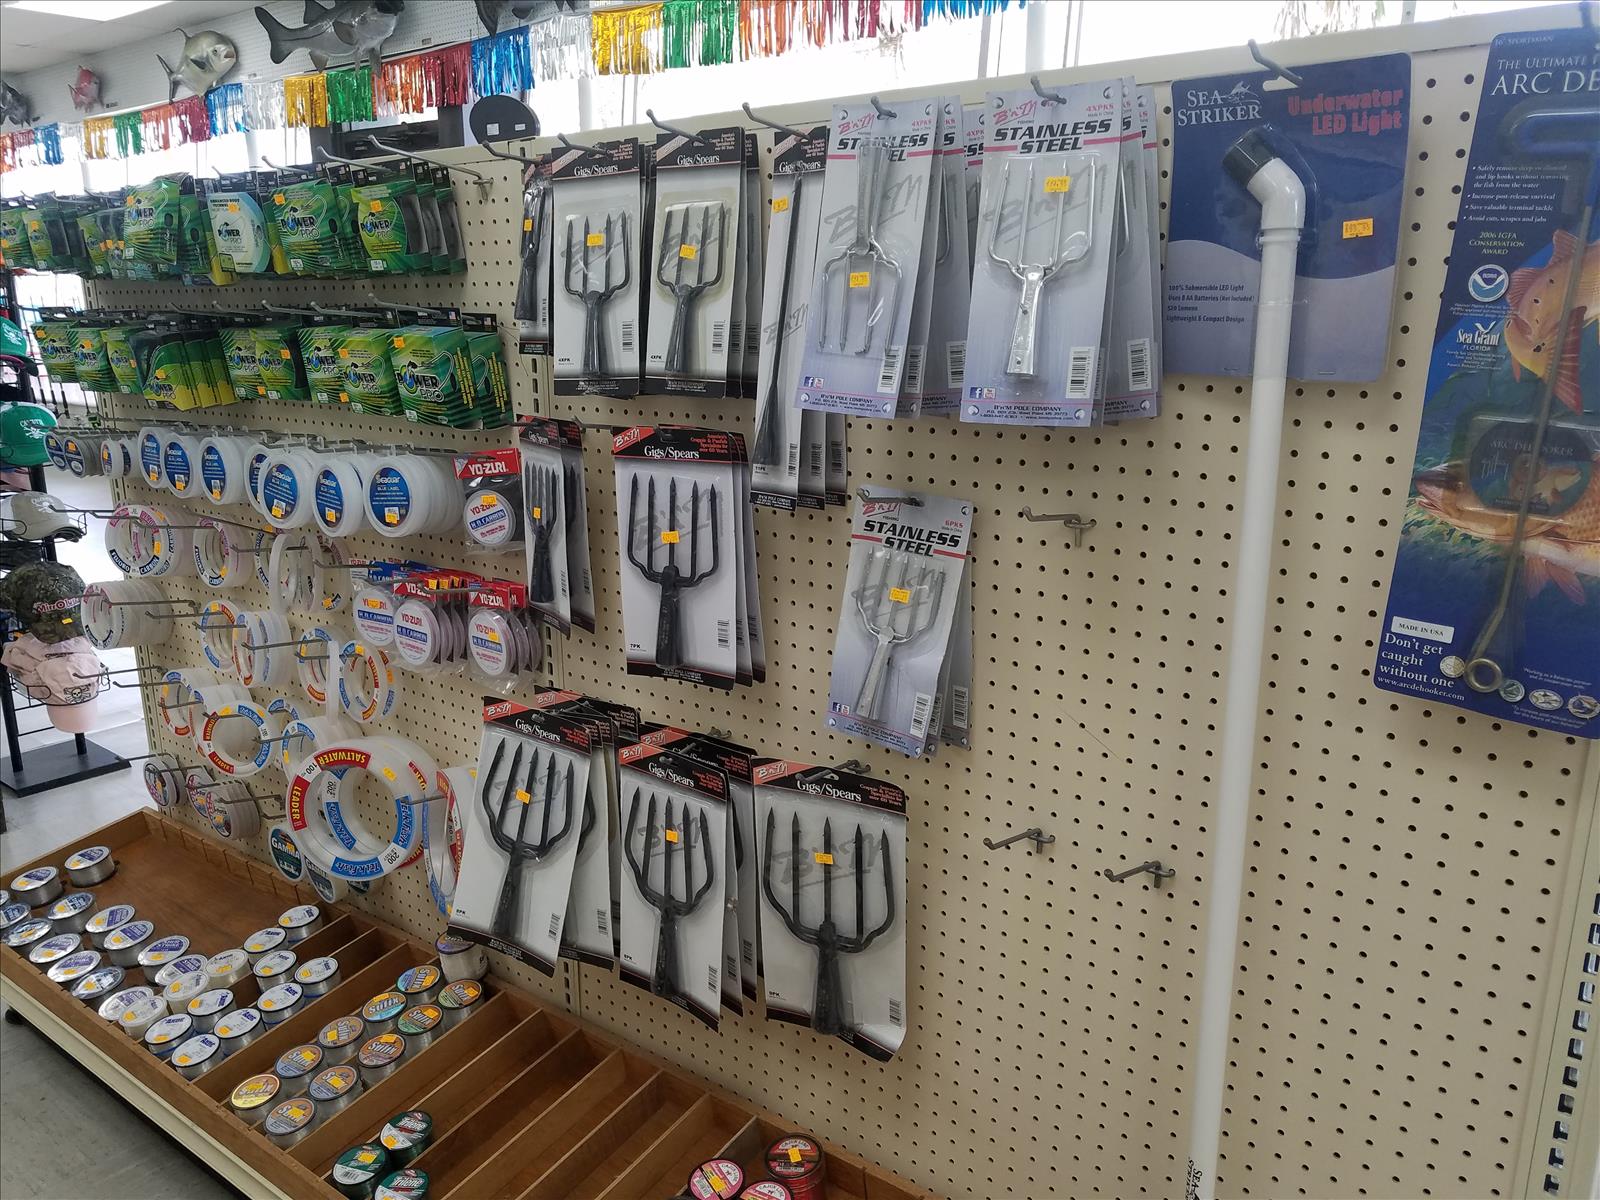 St-Augustine-Marina-Fishing-Tackle-Supplies-Gear-4